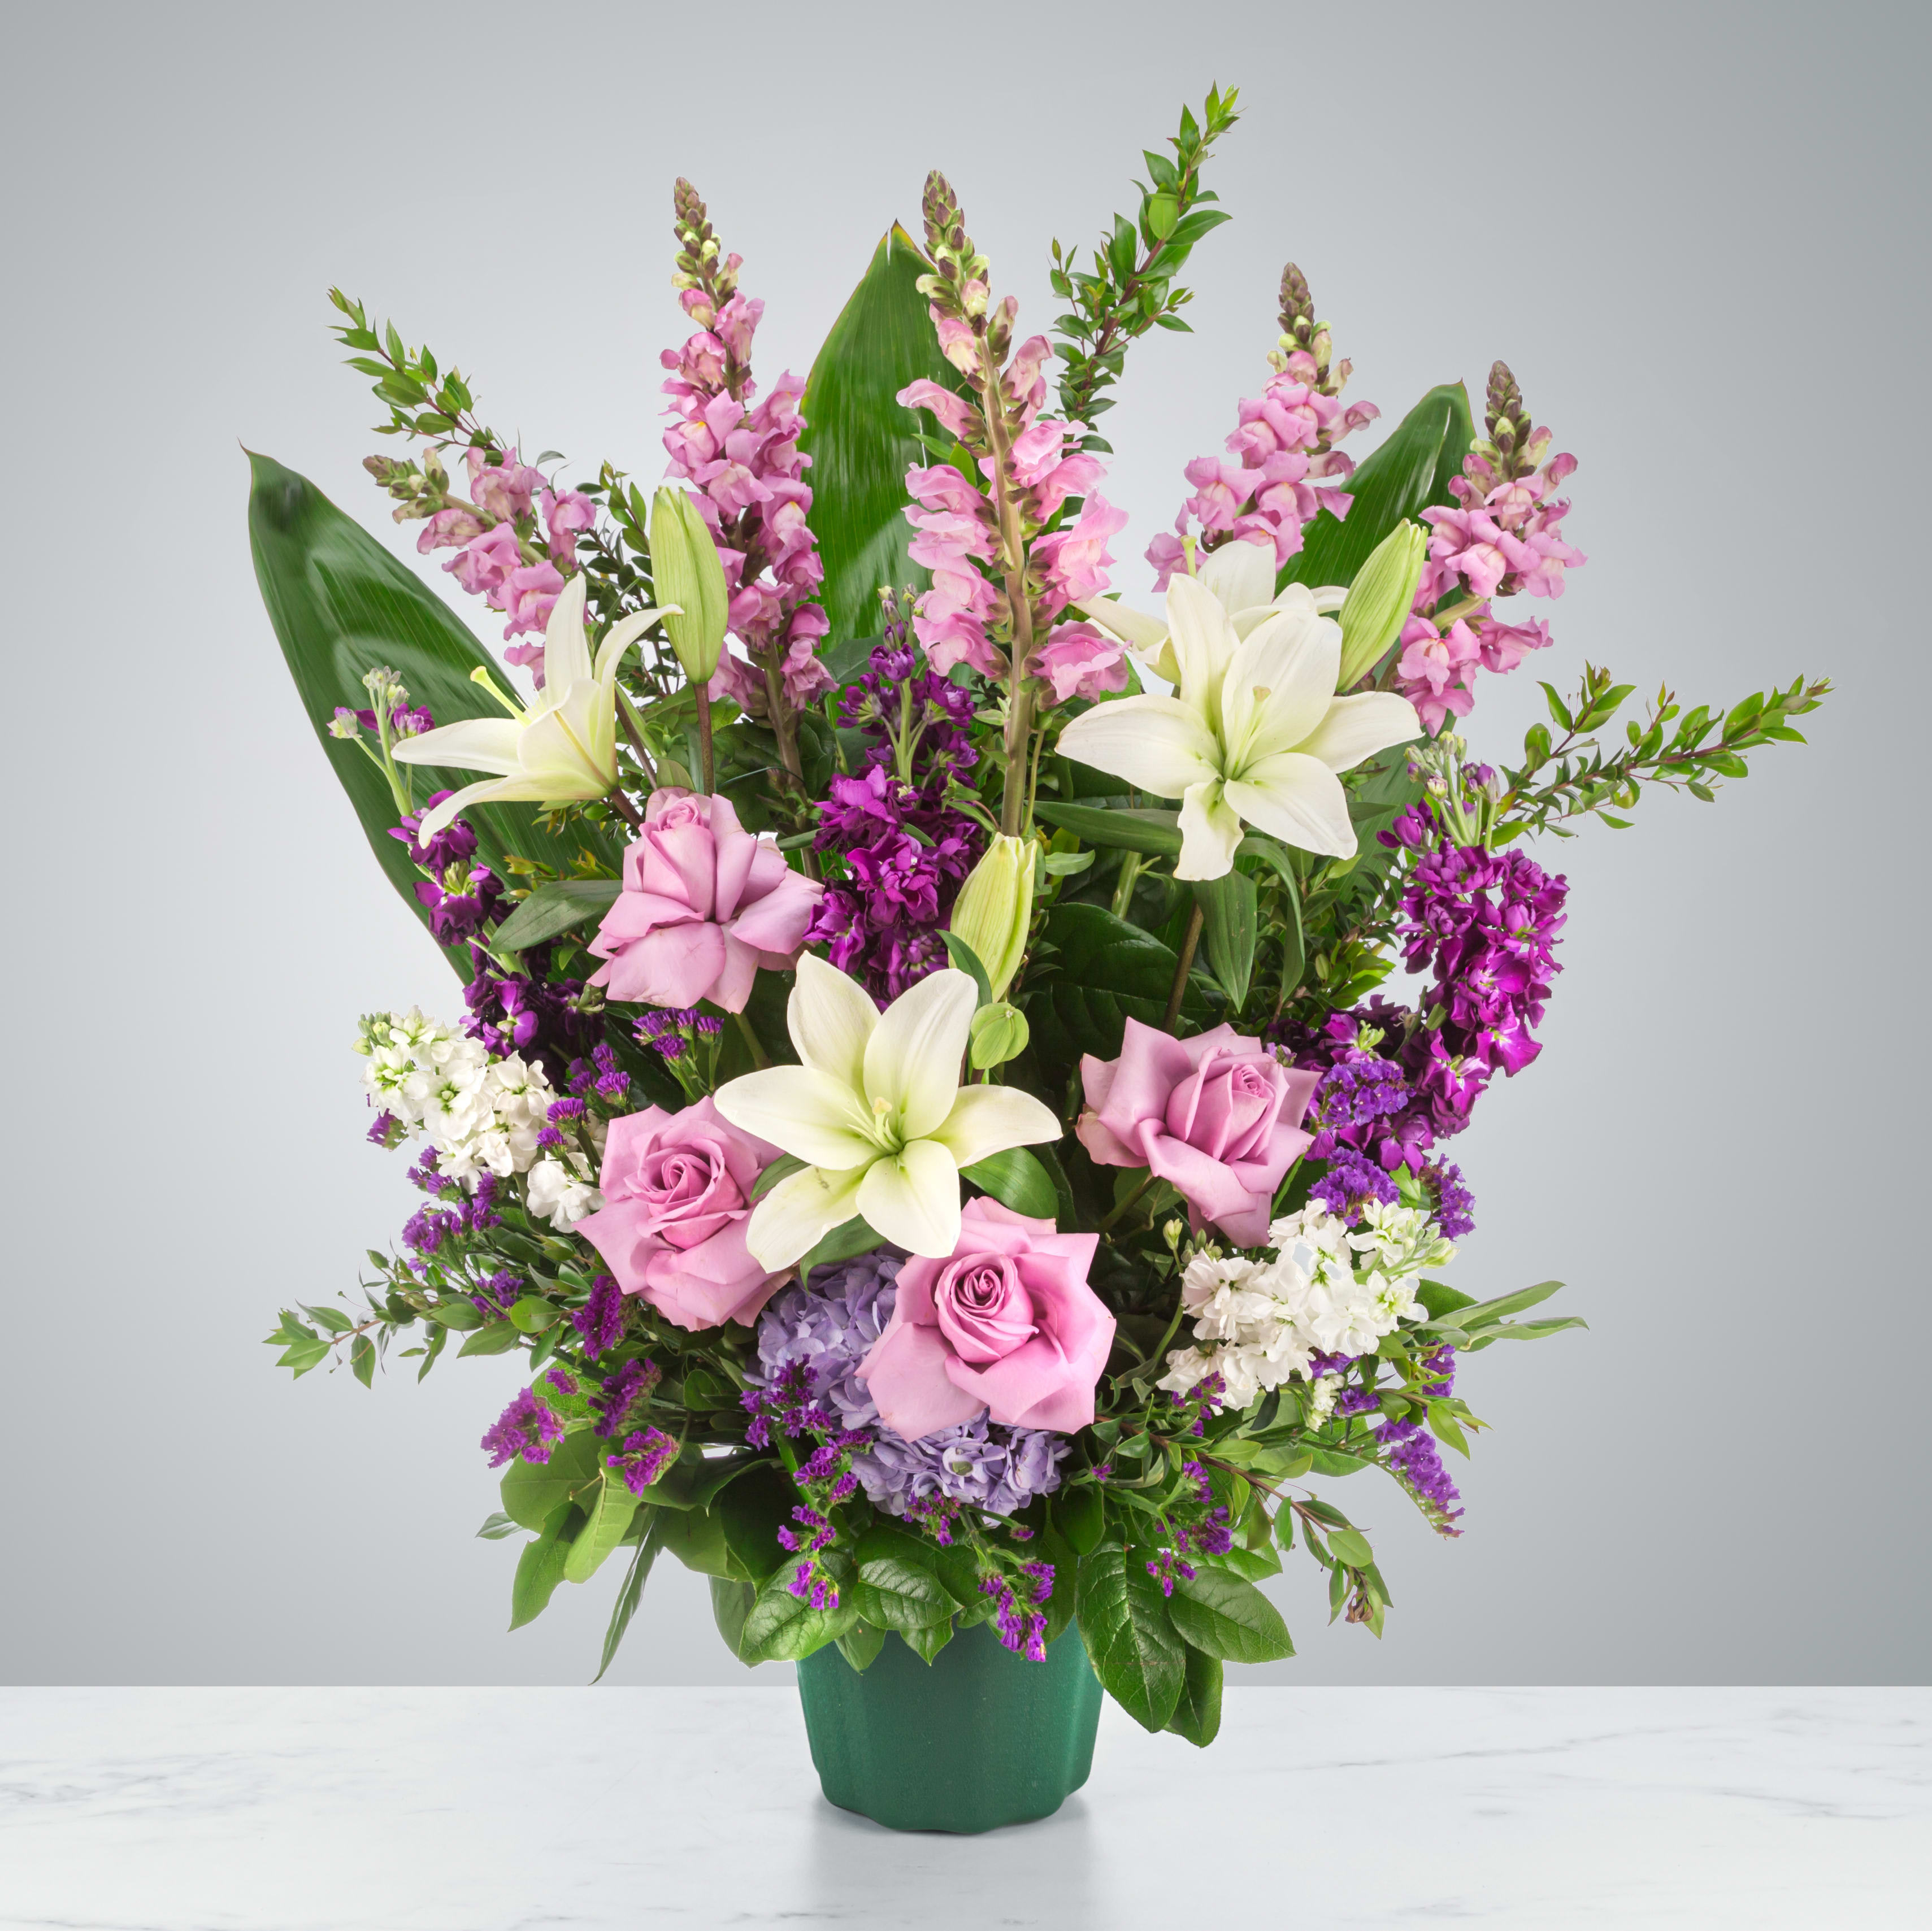 Purple Blessing by BloomNation™ - A purple and white sympathy basket featuring snapdragons, roses, lilies, and stock. This fragrant arrangement works for every type of funeral ceremony.